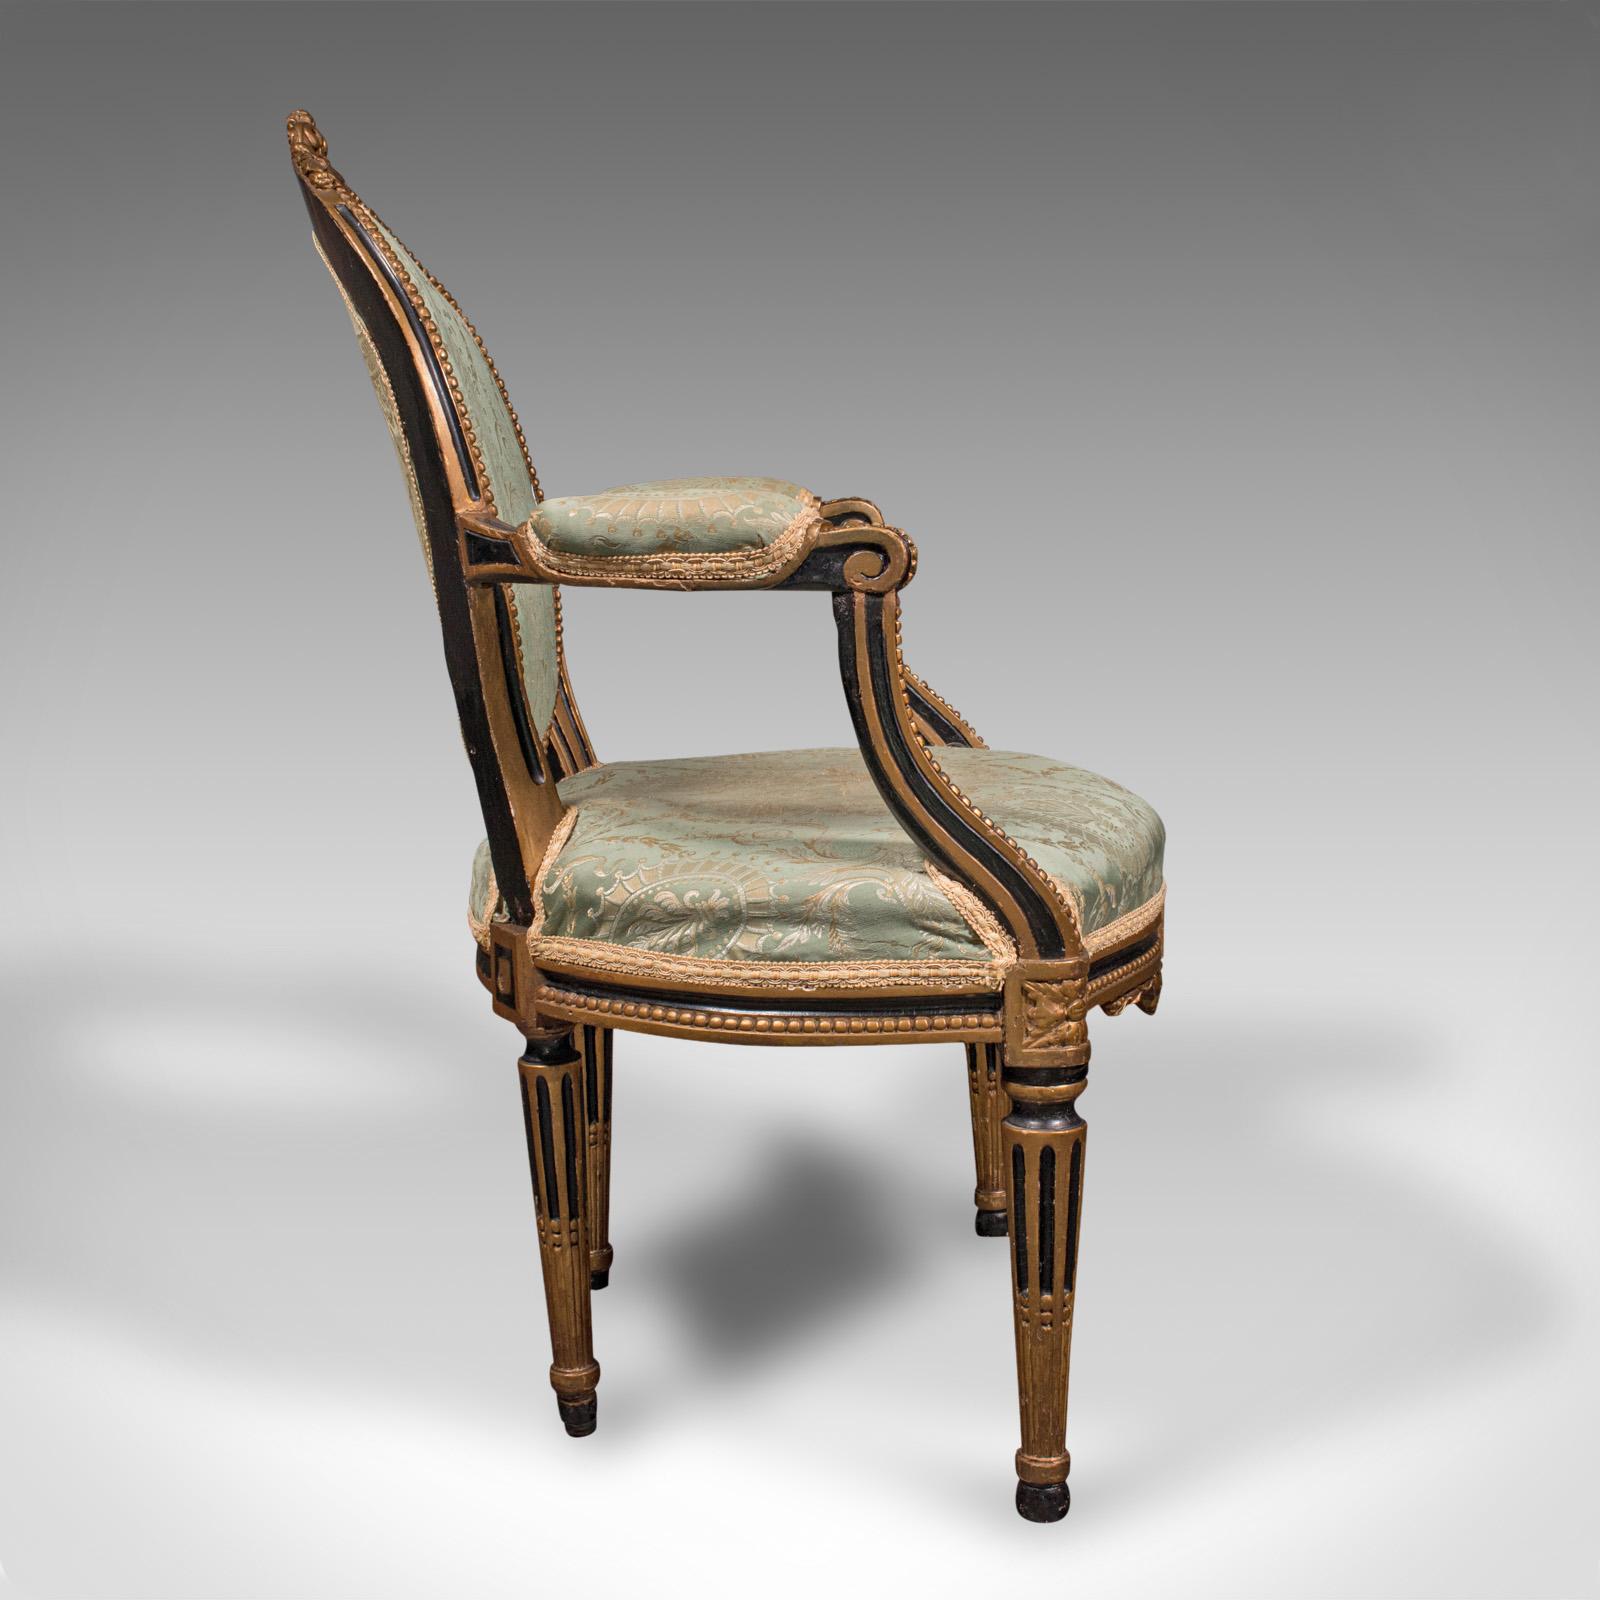 British Antique Dressing Room Armchair, English, Elbow Chair, Silk Cotton, Regency, 1820 For Sale